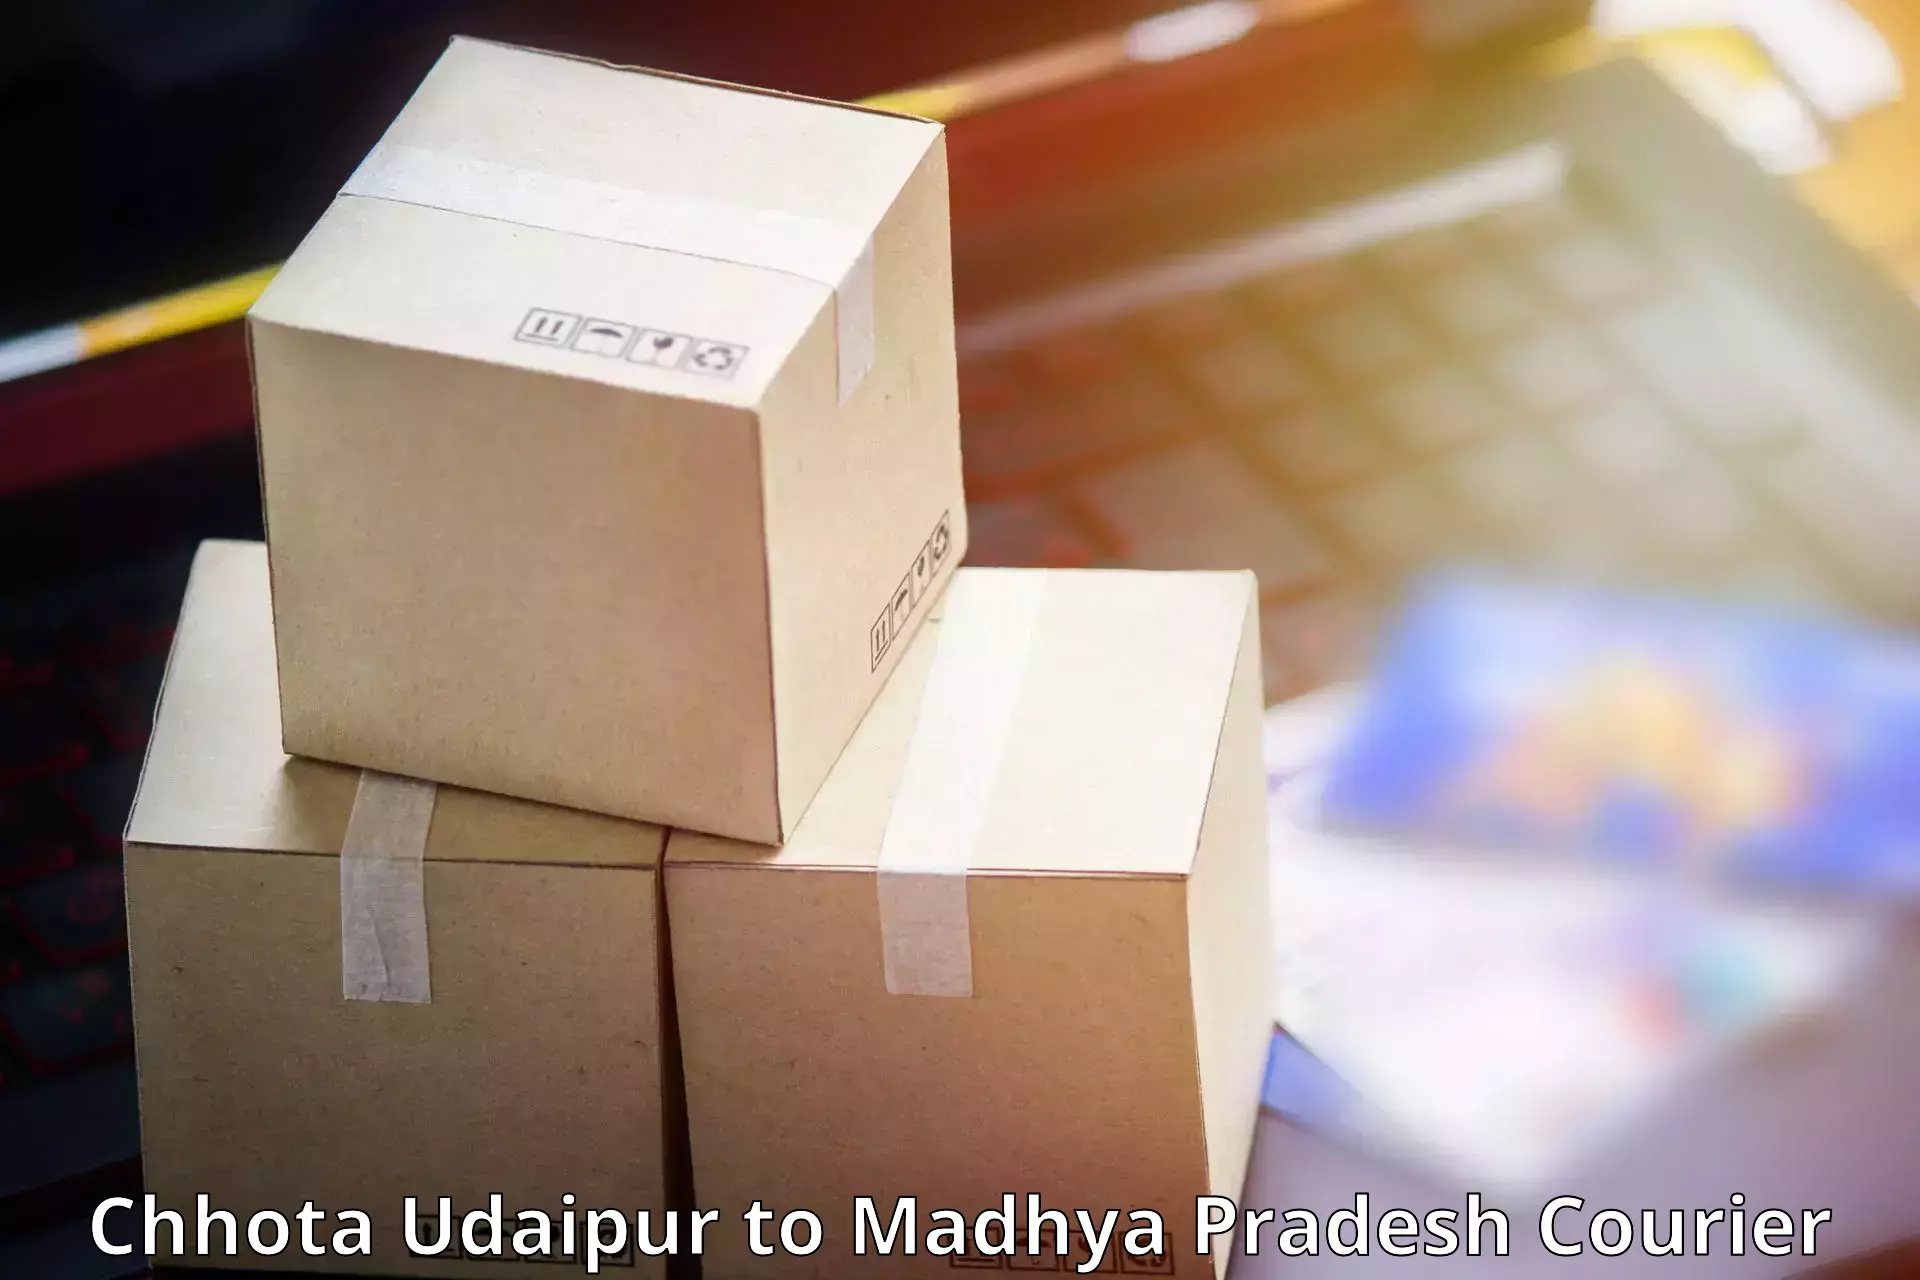 Express courier facilities Chhota Udaipur to Begumganj